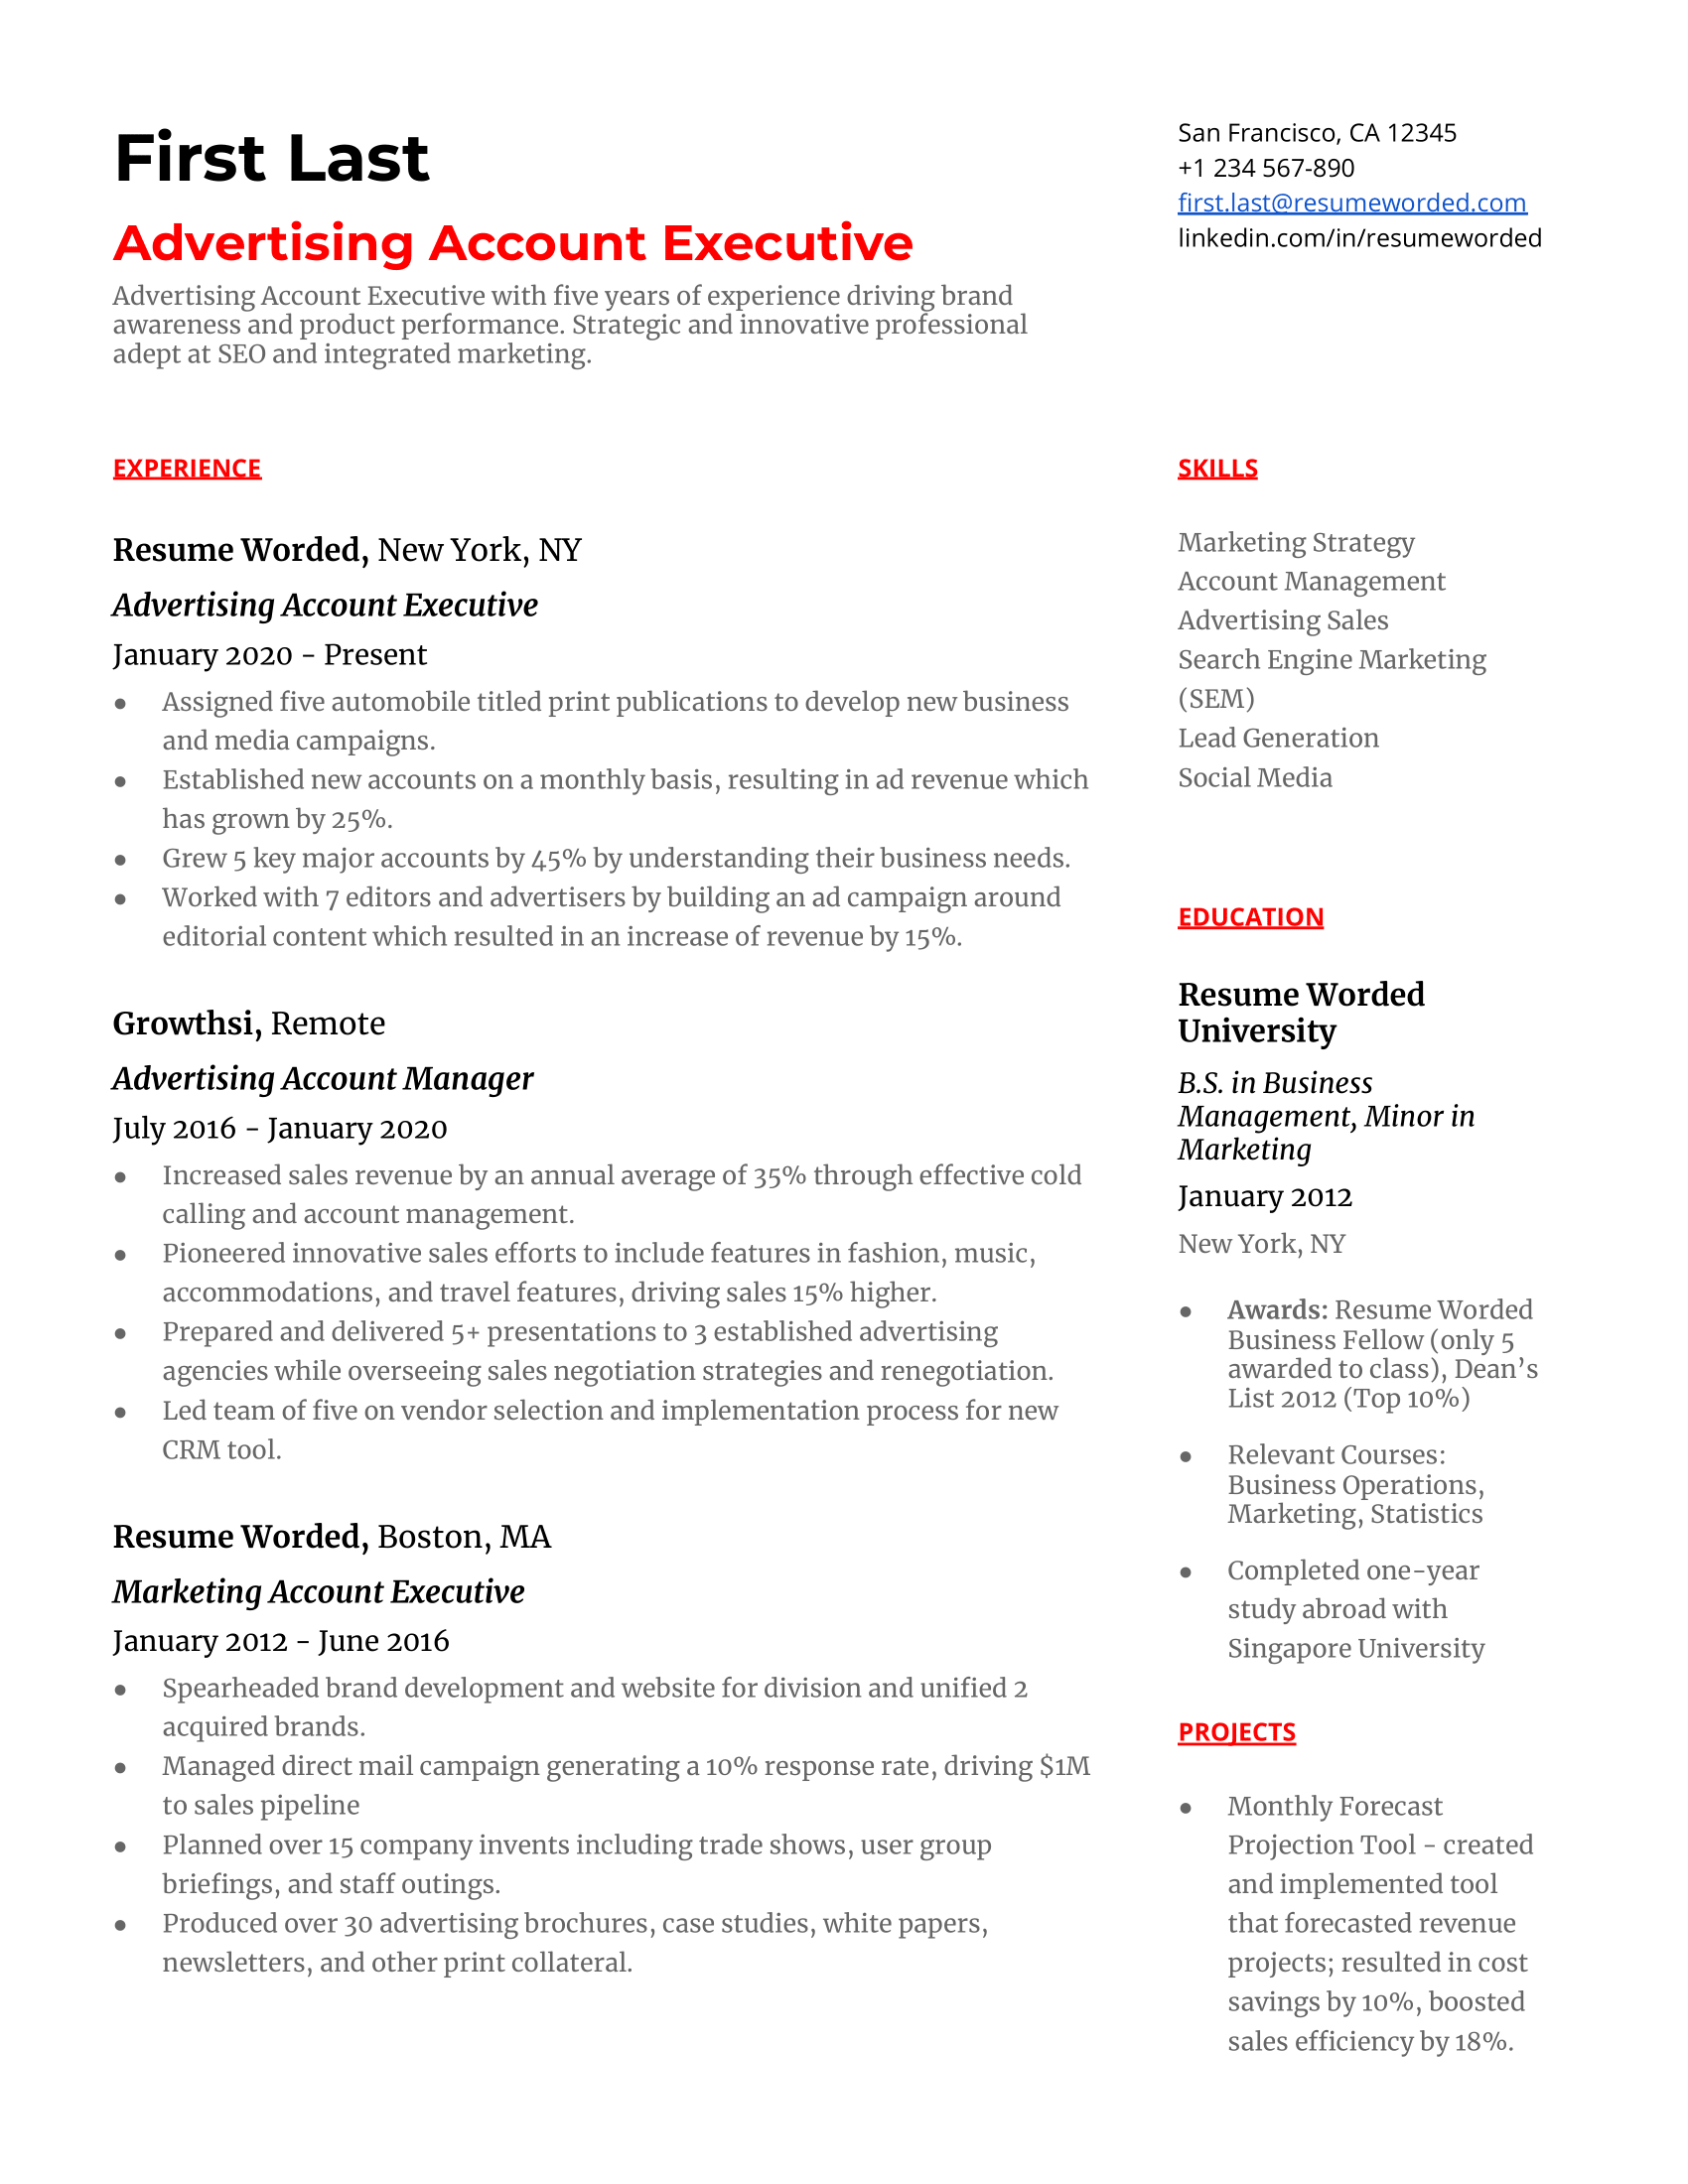 Advertising account executive resume sample template tailored to the specific position